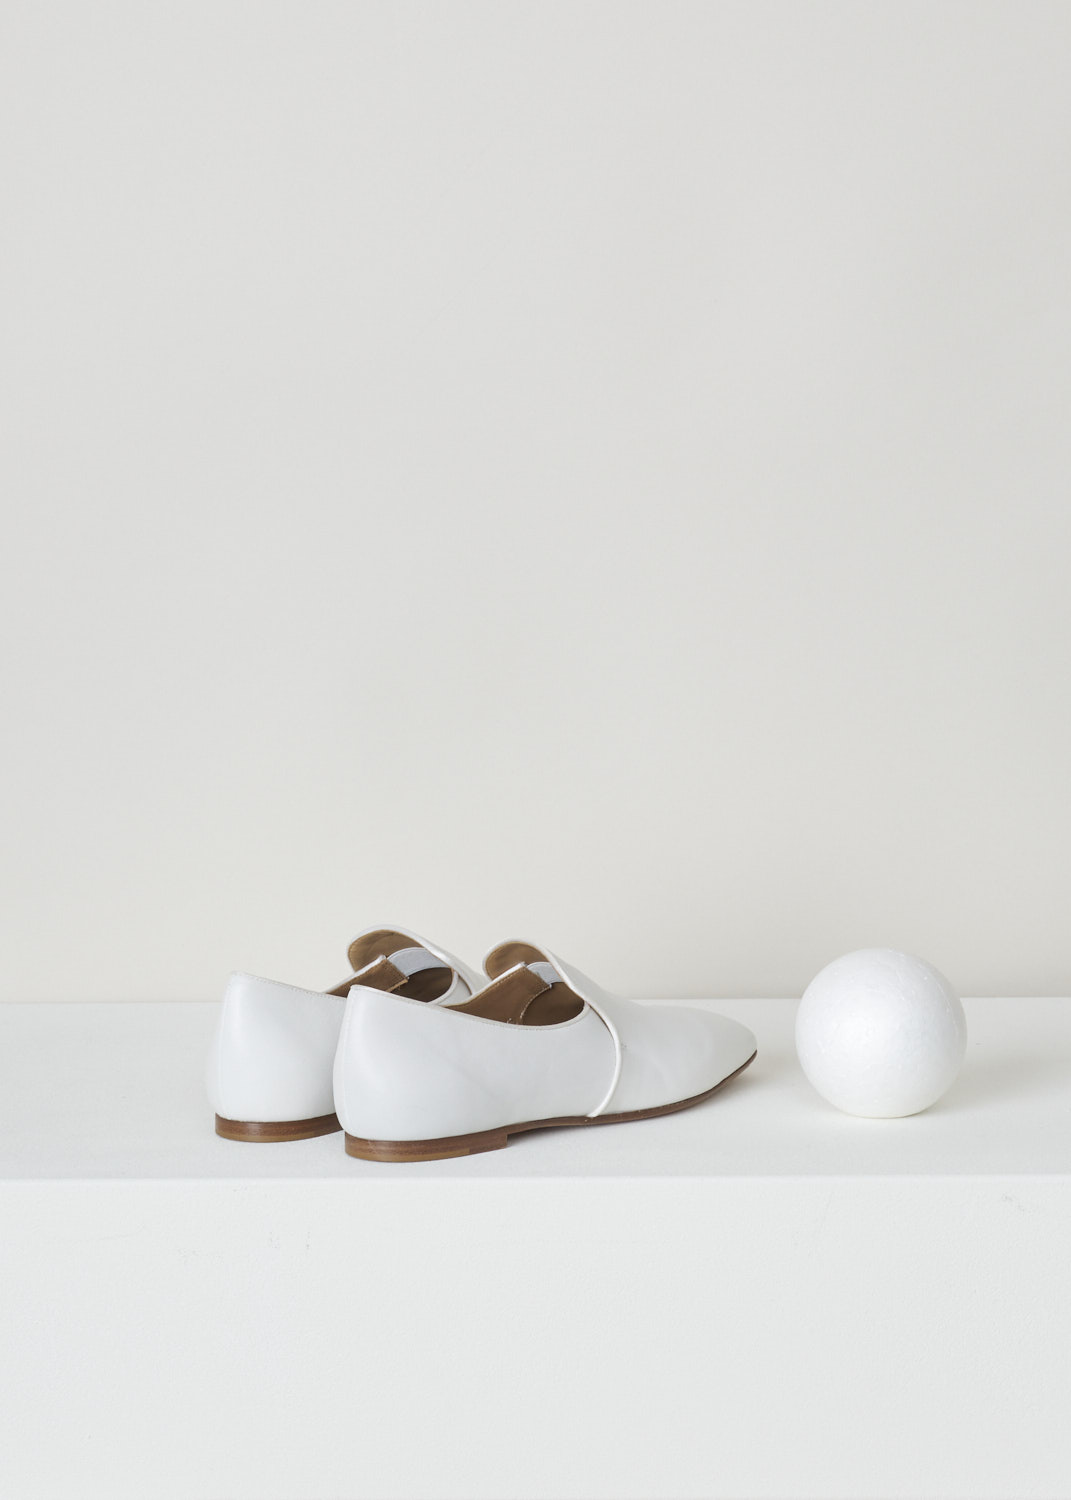 The Row, White leather alys slipper, F1005_L64_WHT, white, back, Made from a minimalist perspective, and crafted out of butter-soft calfskin. Featuring a rounded toe vamp and comes with white satin piping on the topline. The seamless lining ensures they can be worn with or without socks.